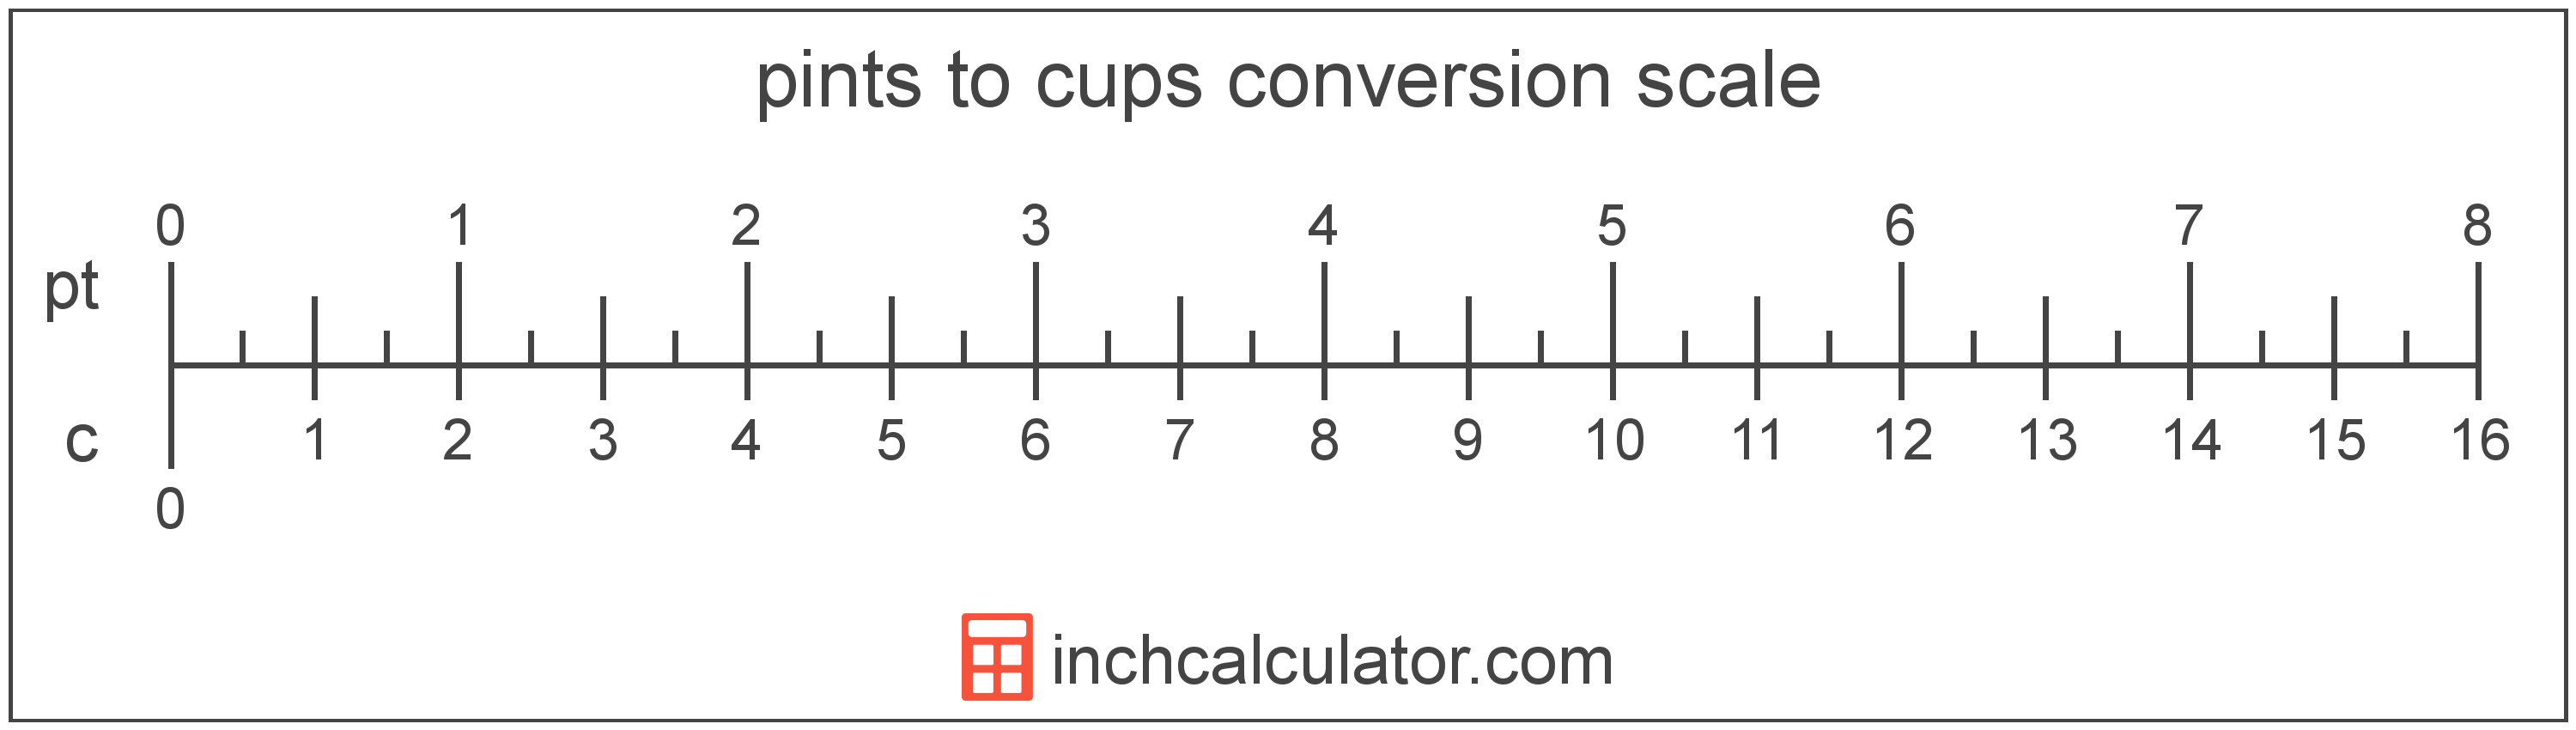 Cups to Pints Conversion (c to pt) - Inch Calculator